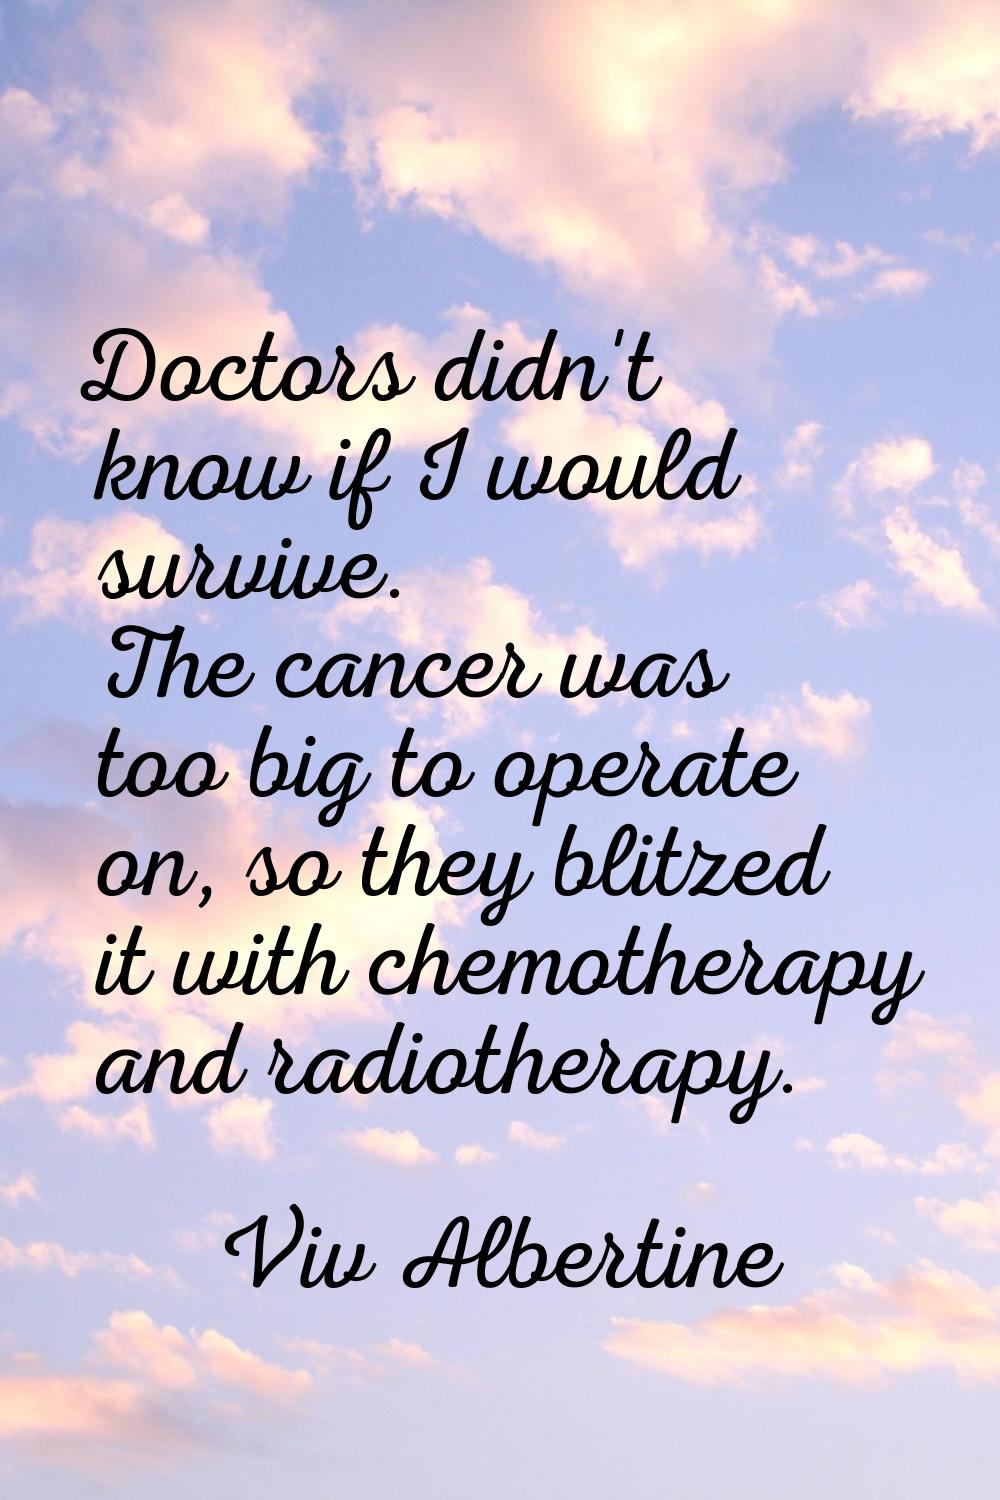 Doctors didn't know if I would survive. The cancer was too big to operate on, so they blitzed it wi